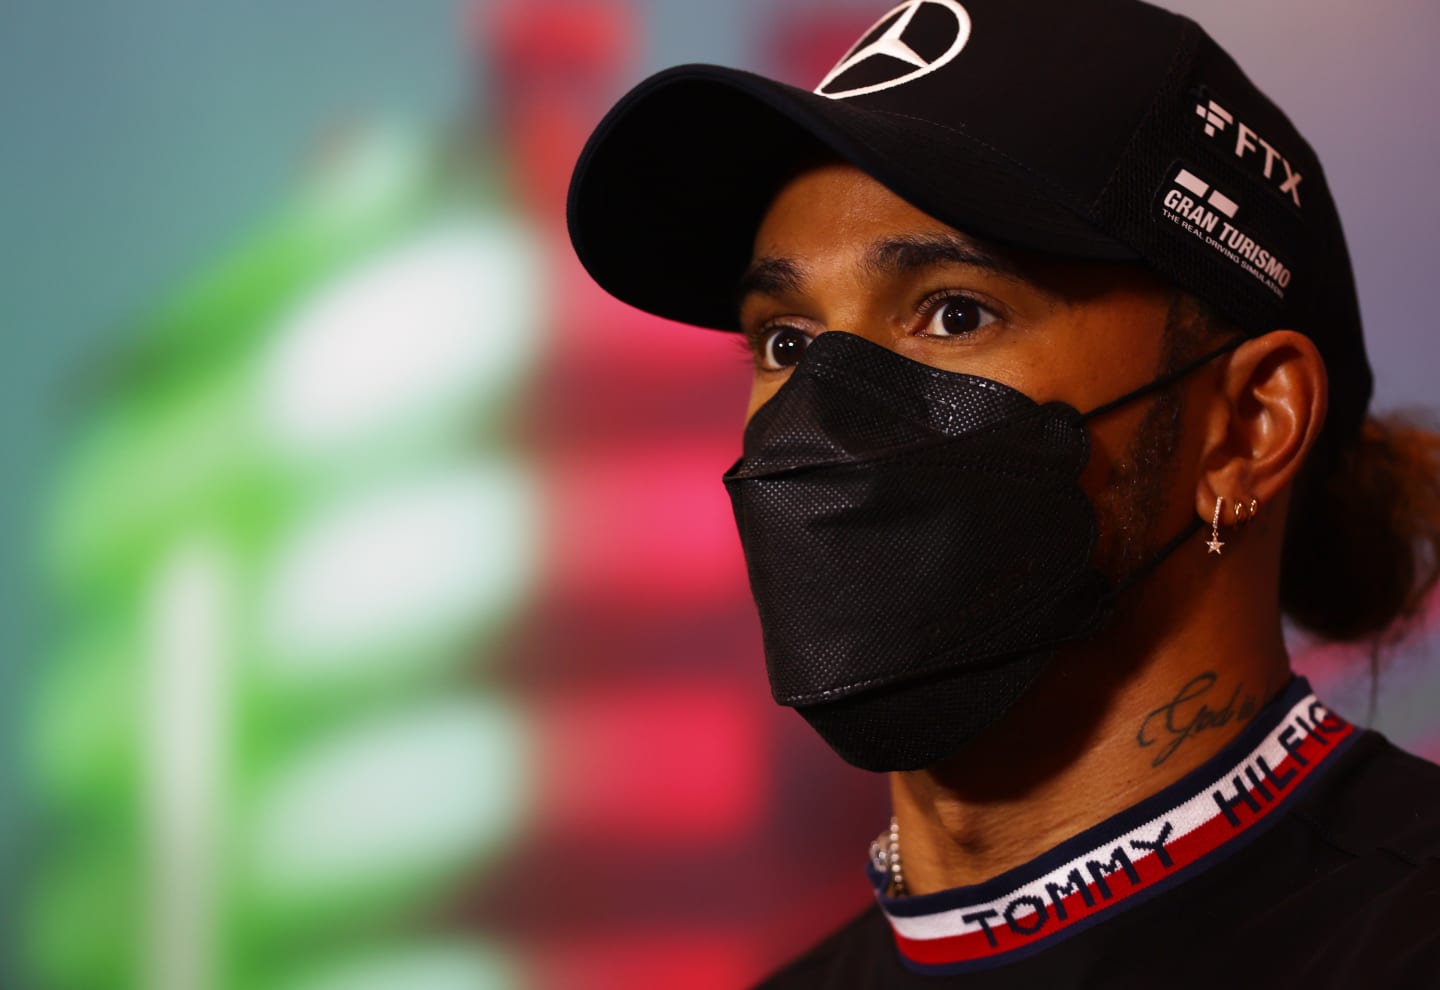 IMOLA, ITALY - APRIL 22: Lewis Hamilton of Great Britain and Mercedes talks in the Drivers Press Conference prior to practice ahead of the F1 Grand Prix of Emilia Romagna at Autodromo Enzo e Dino Ferrari on April 22, 2022 in Imola, Italy. (Photo by Lars Baron/Getty Images)